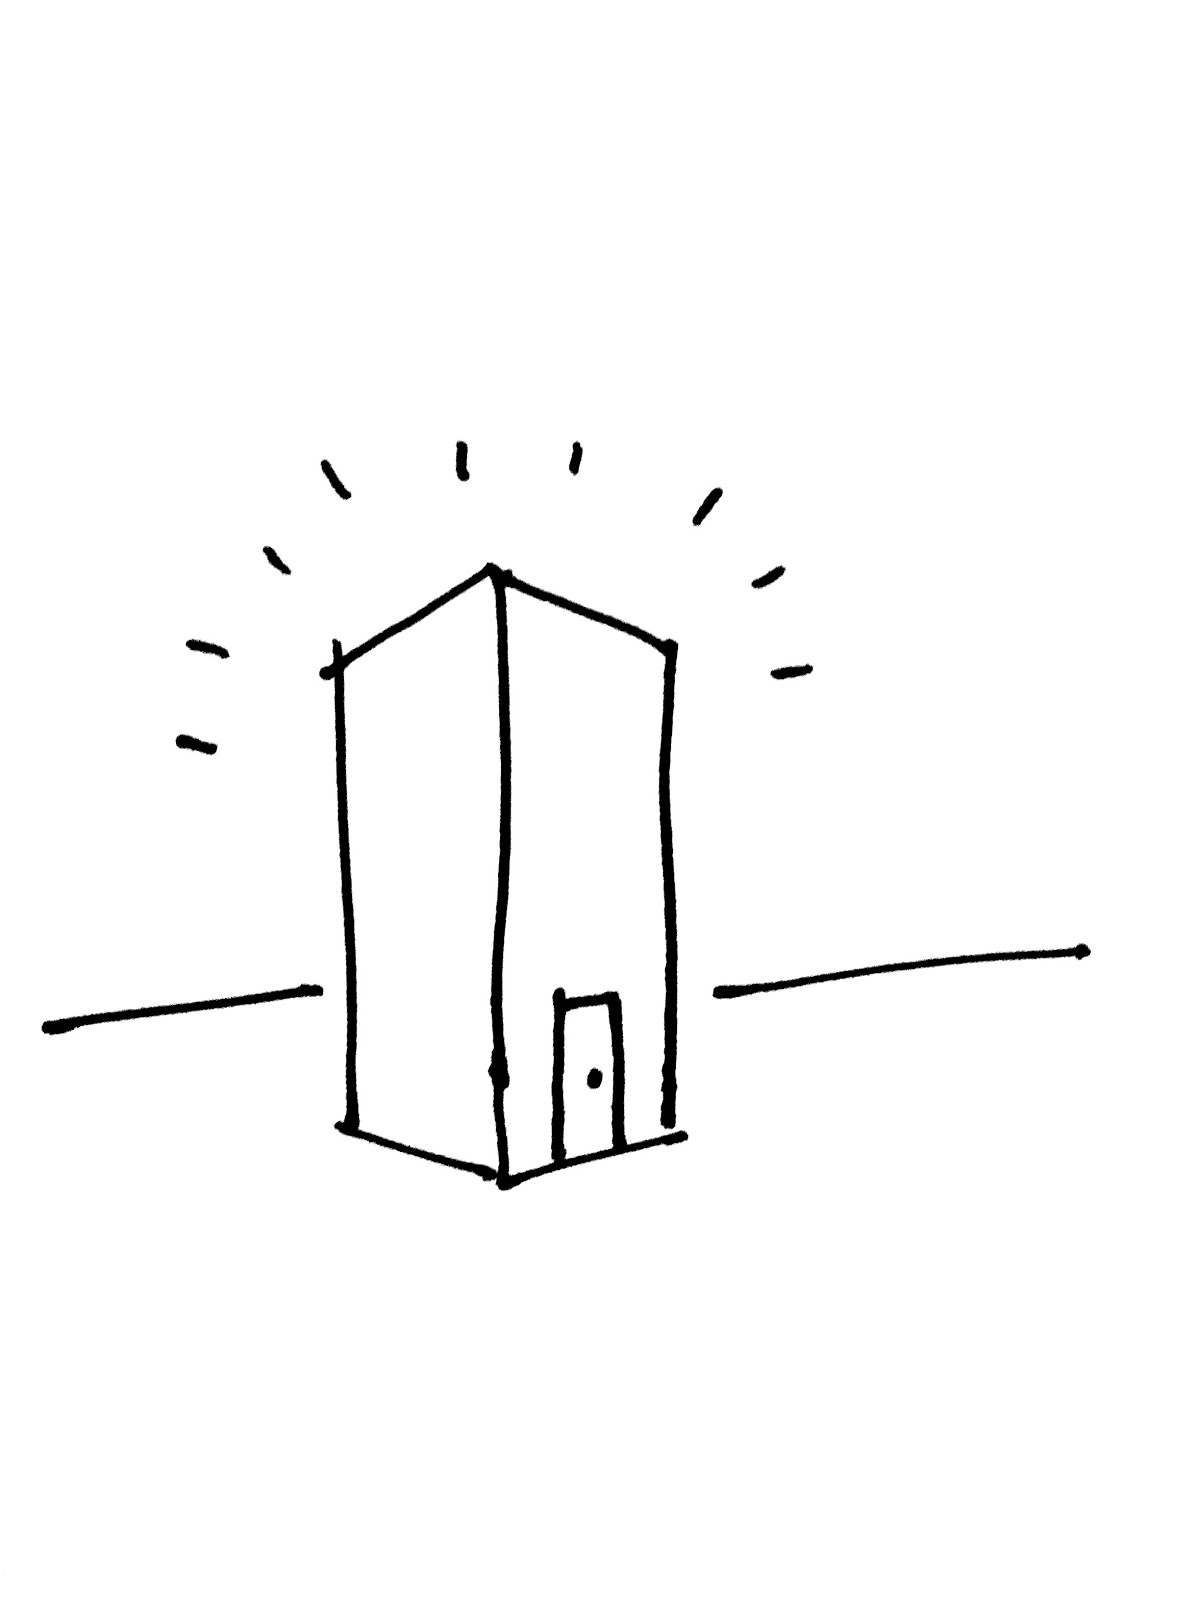 A drawing representing a monolith